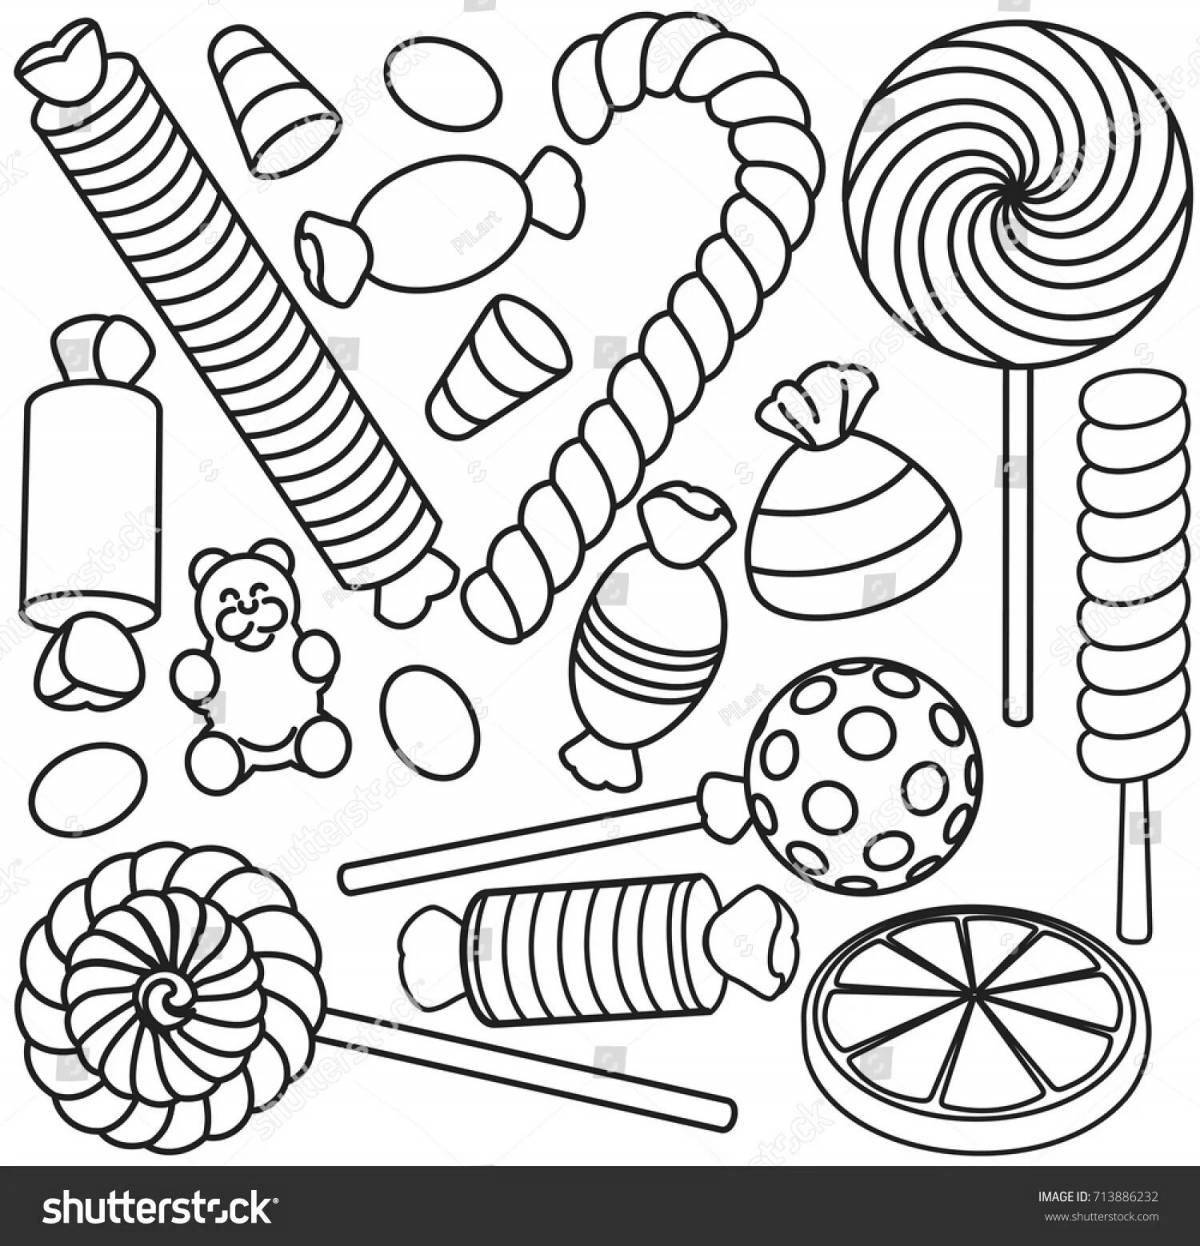 Coloring page charming sweet world